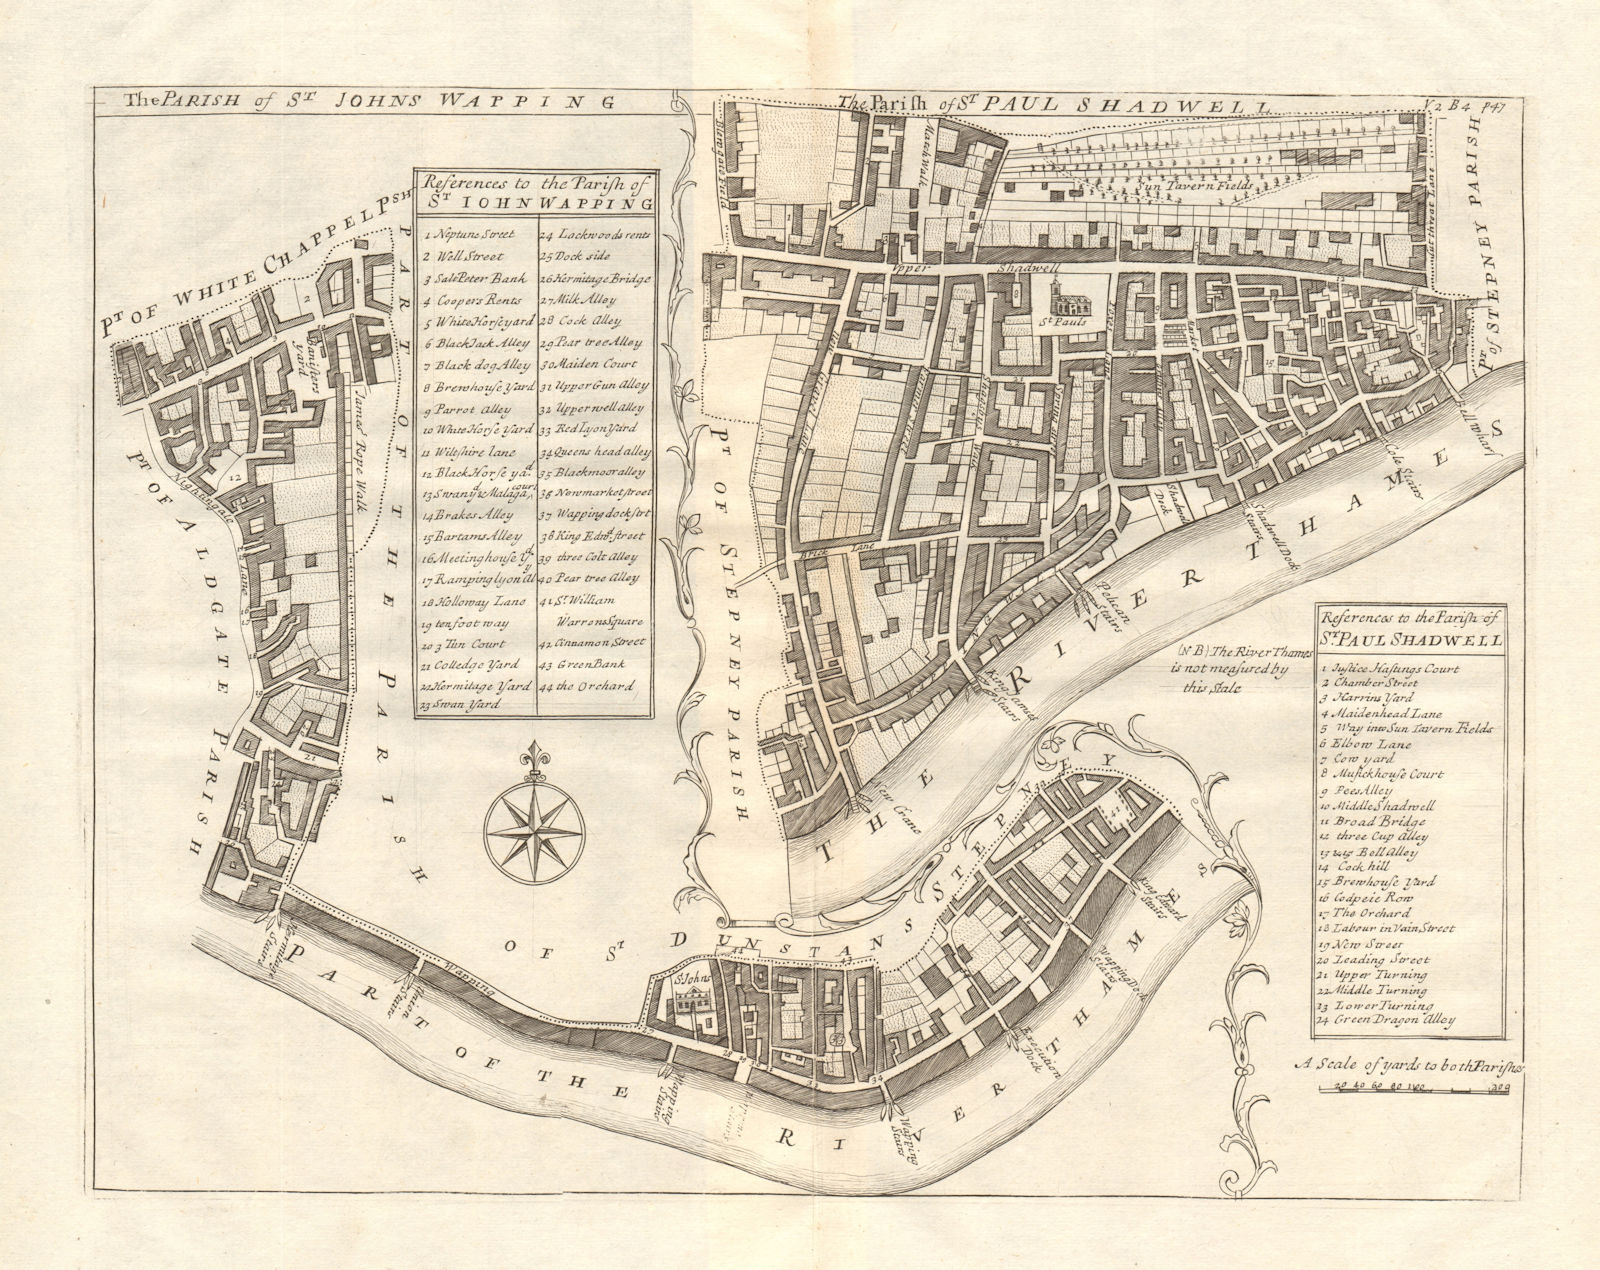 The parishes of St John's, Wapping & St Paul, Shadwell. STOW/STRYPE 1720 map